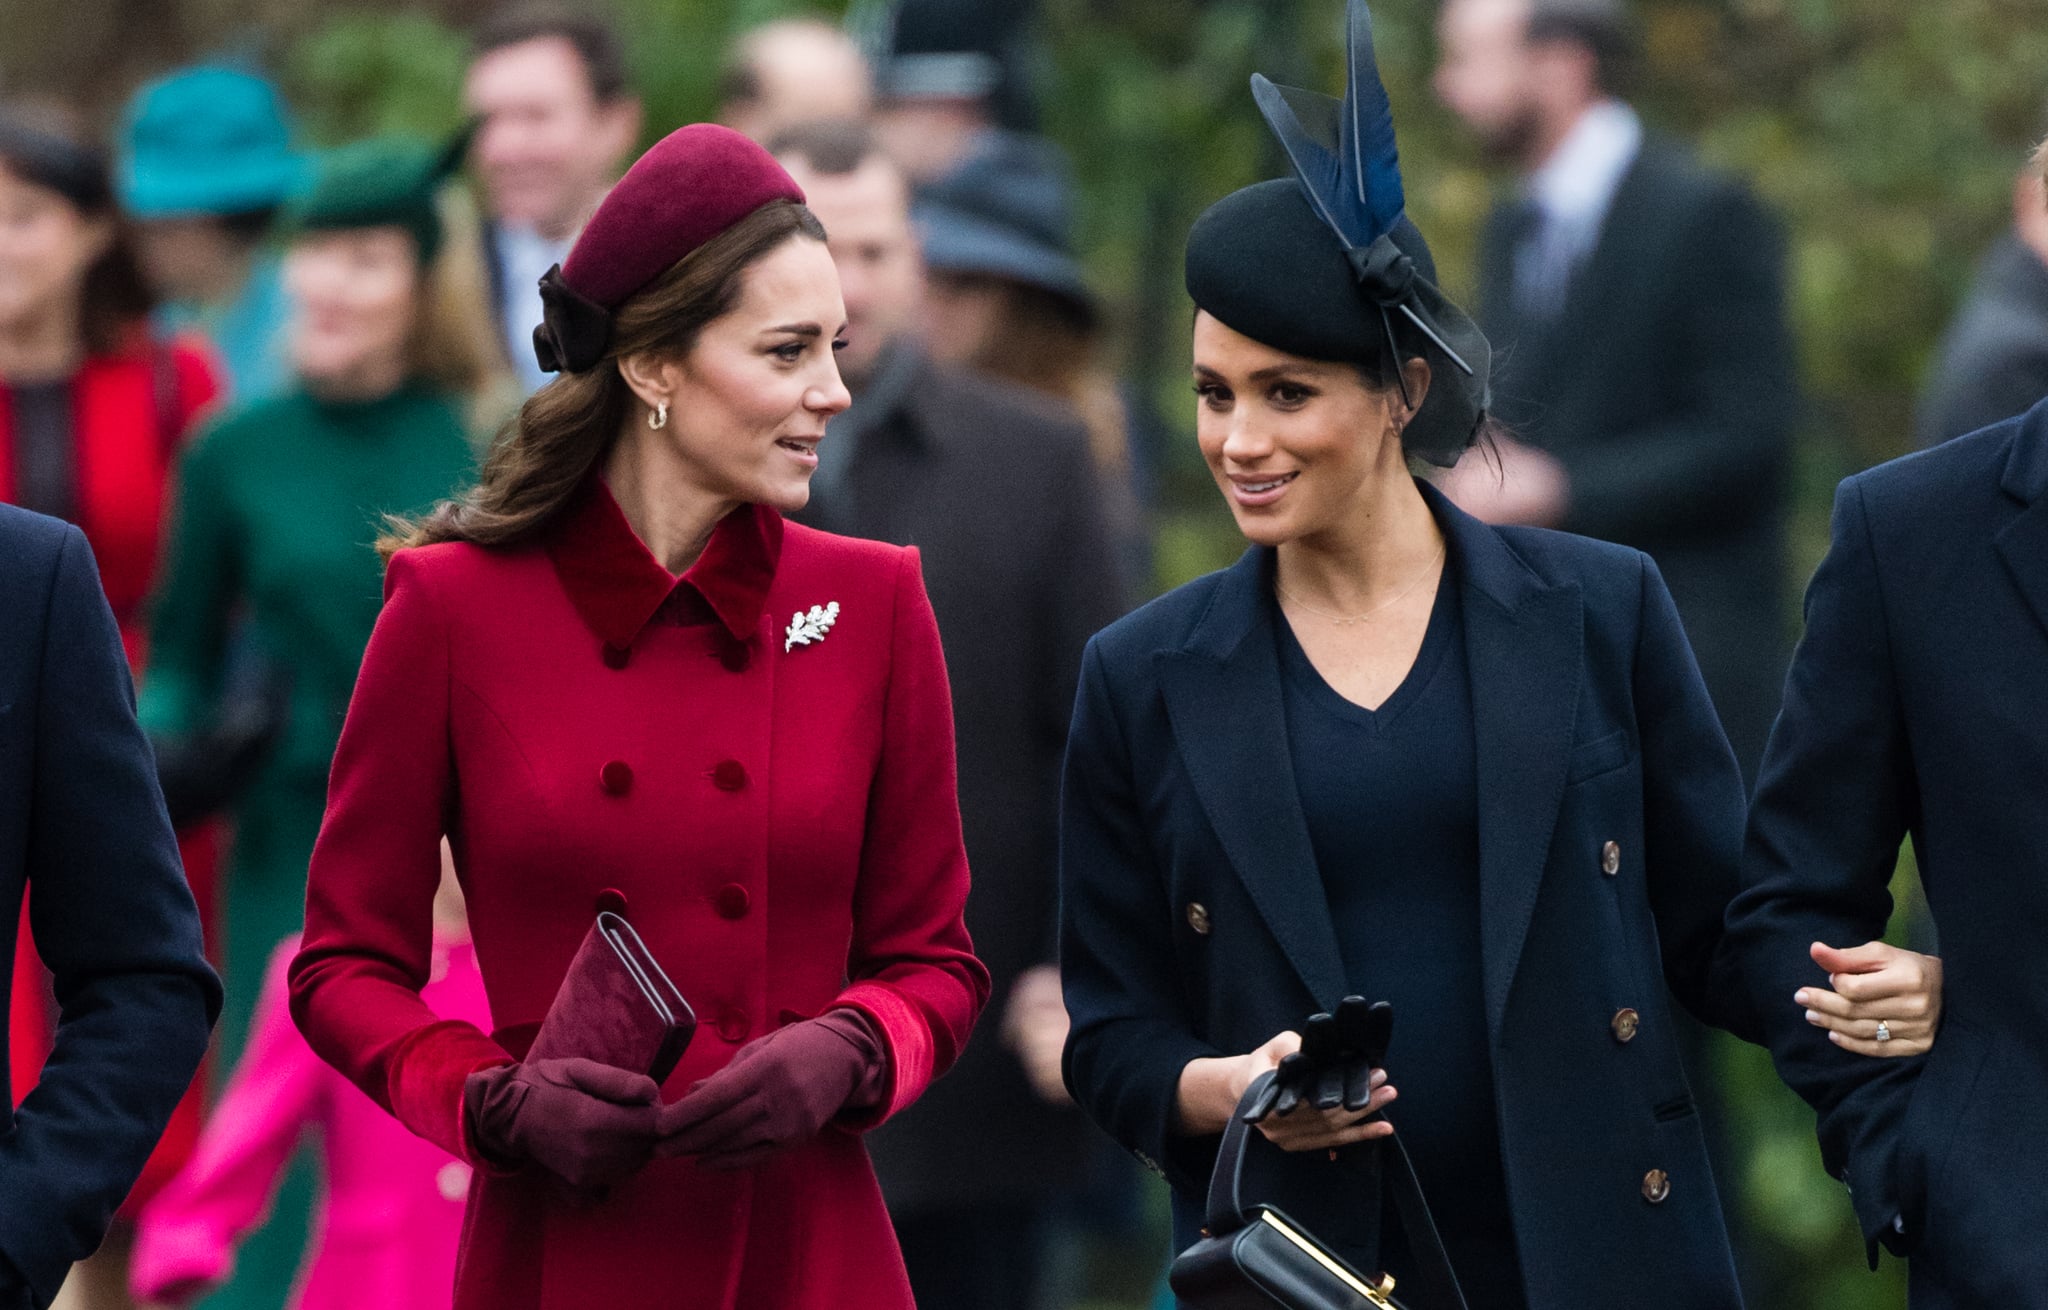 KING'S LYNN, ENGLAND - DECEMBER 25: Catherine, Duchess of Cambridge and Meghan, Duchess of Sussex attend Christmas Day Church service at Church of St Mary Magdalene on the Sandringham estate on December 25, 2018 in King's Lynn, England. (Photo by Samir Hussein/WireImage)